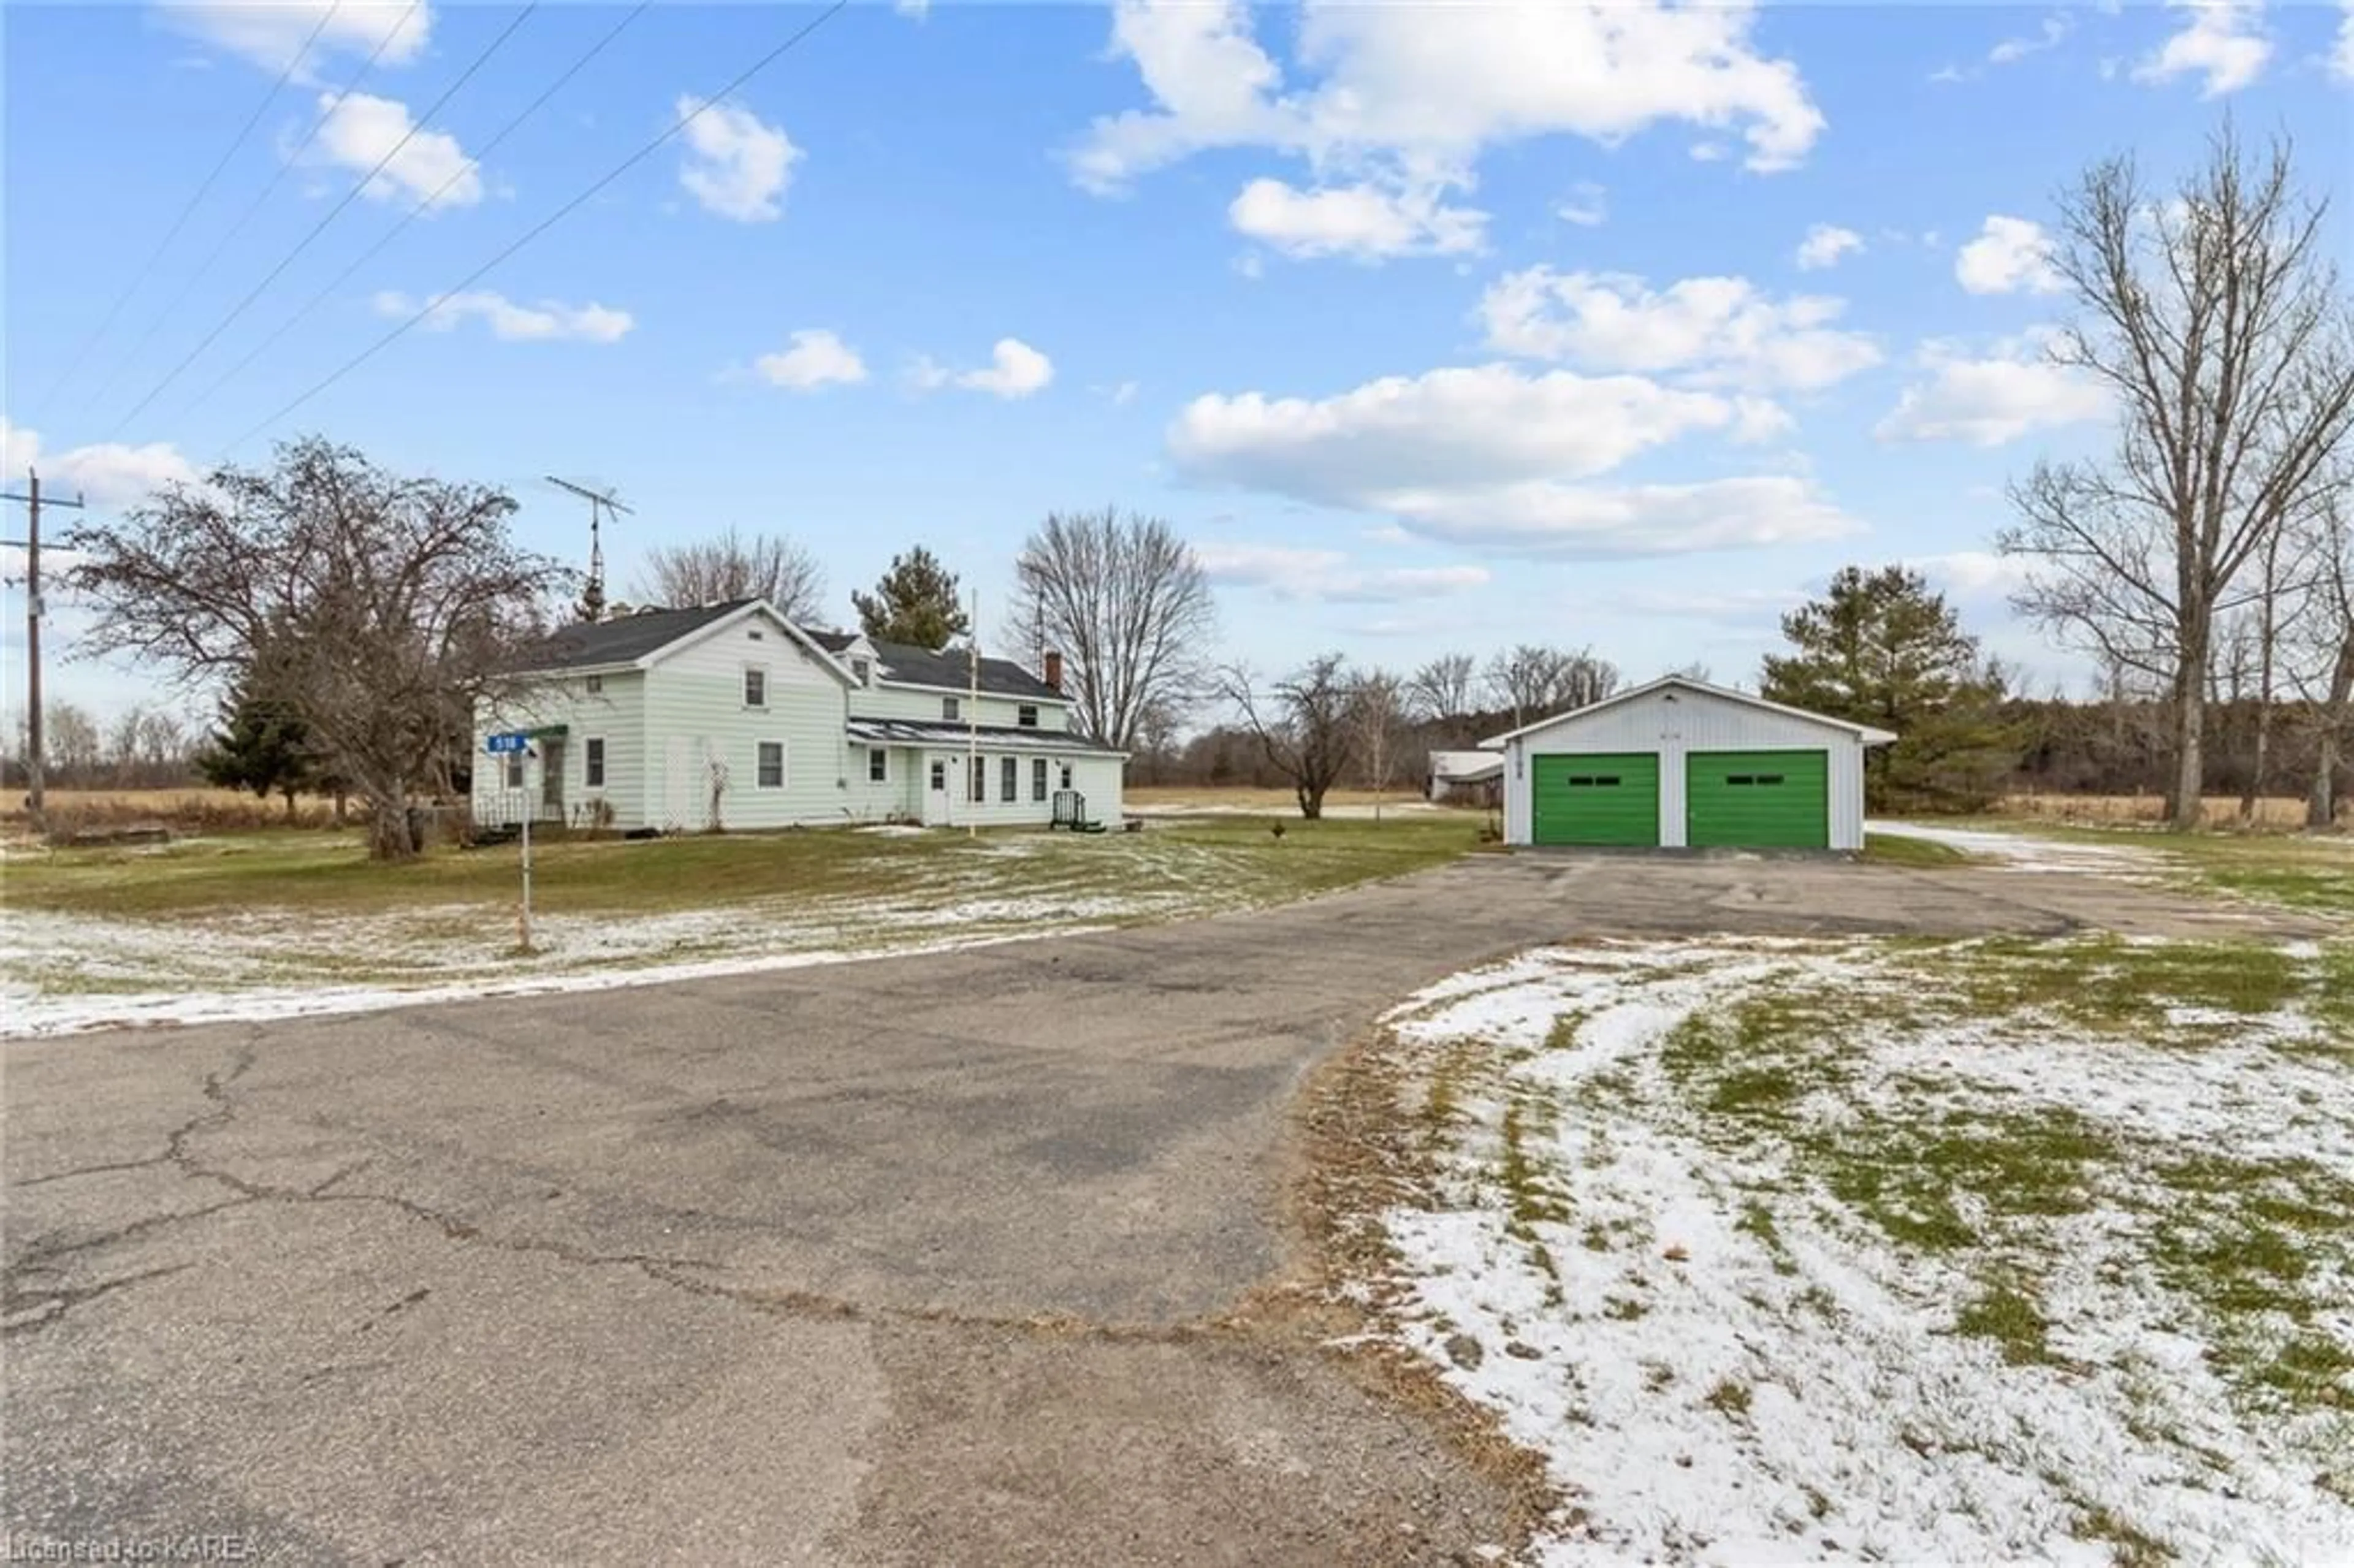 Street view for 518 County Rd 42, Athens Ontario K0E 1B0